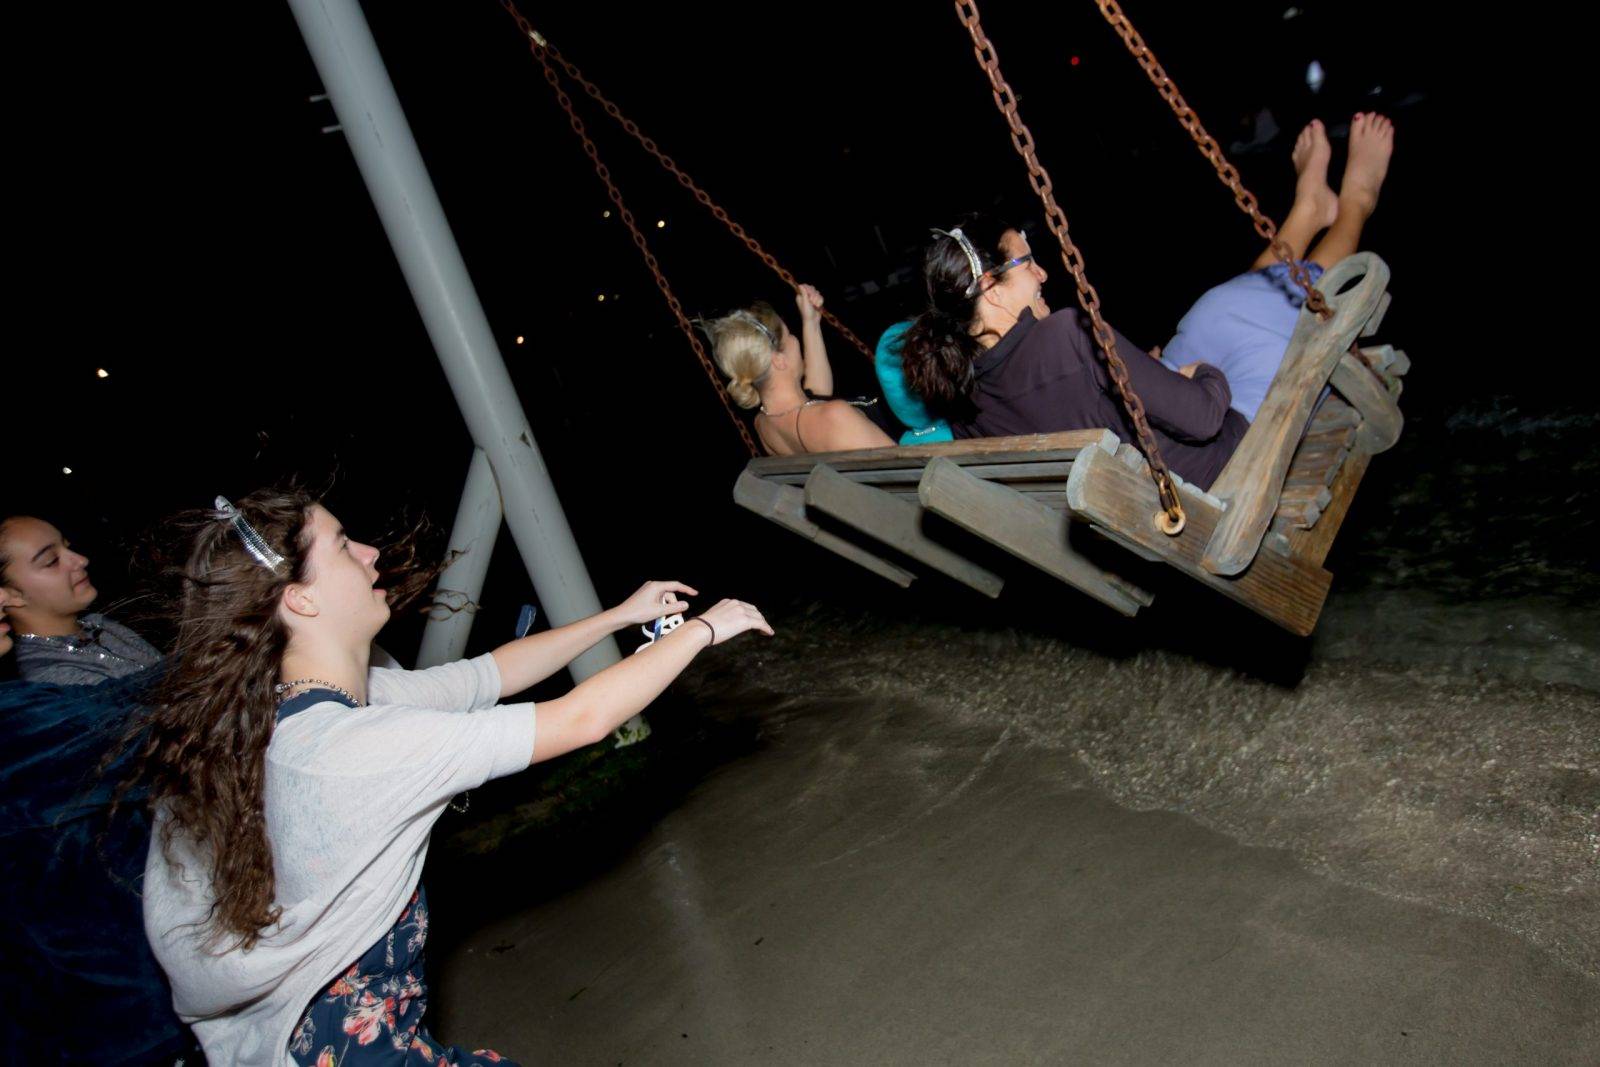 Three women pushing their friends at the swing